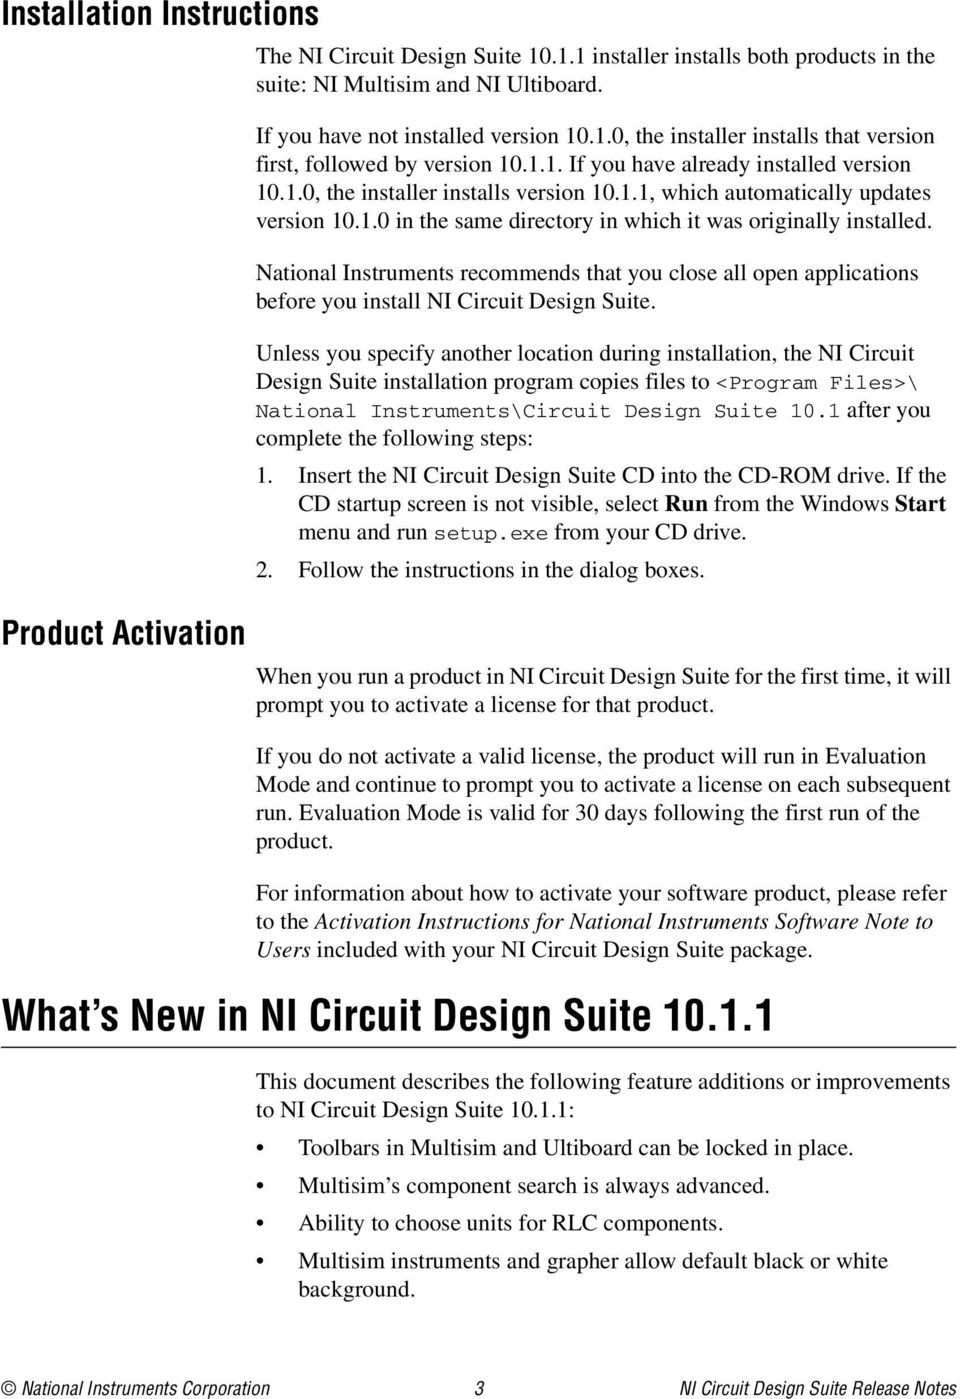 National Instruments recommends that you close all open applications before you install NI Circuit Design Suite.